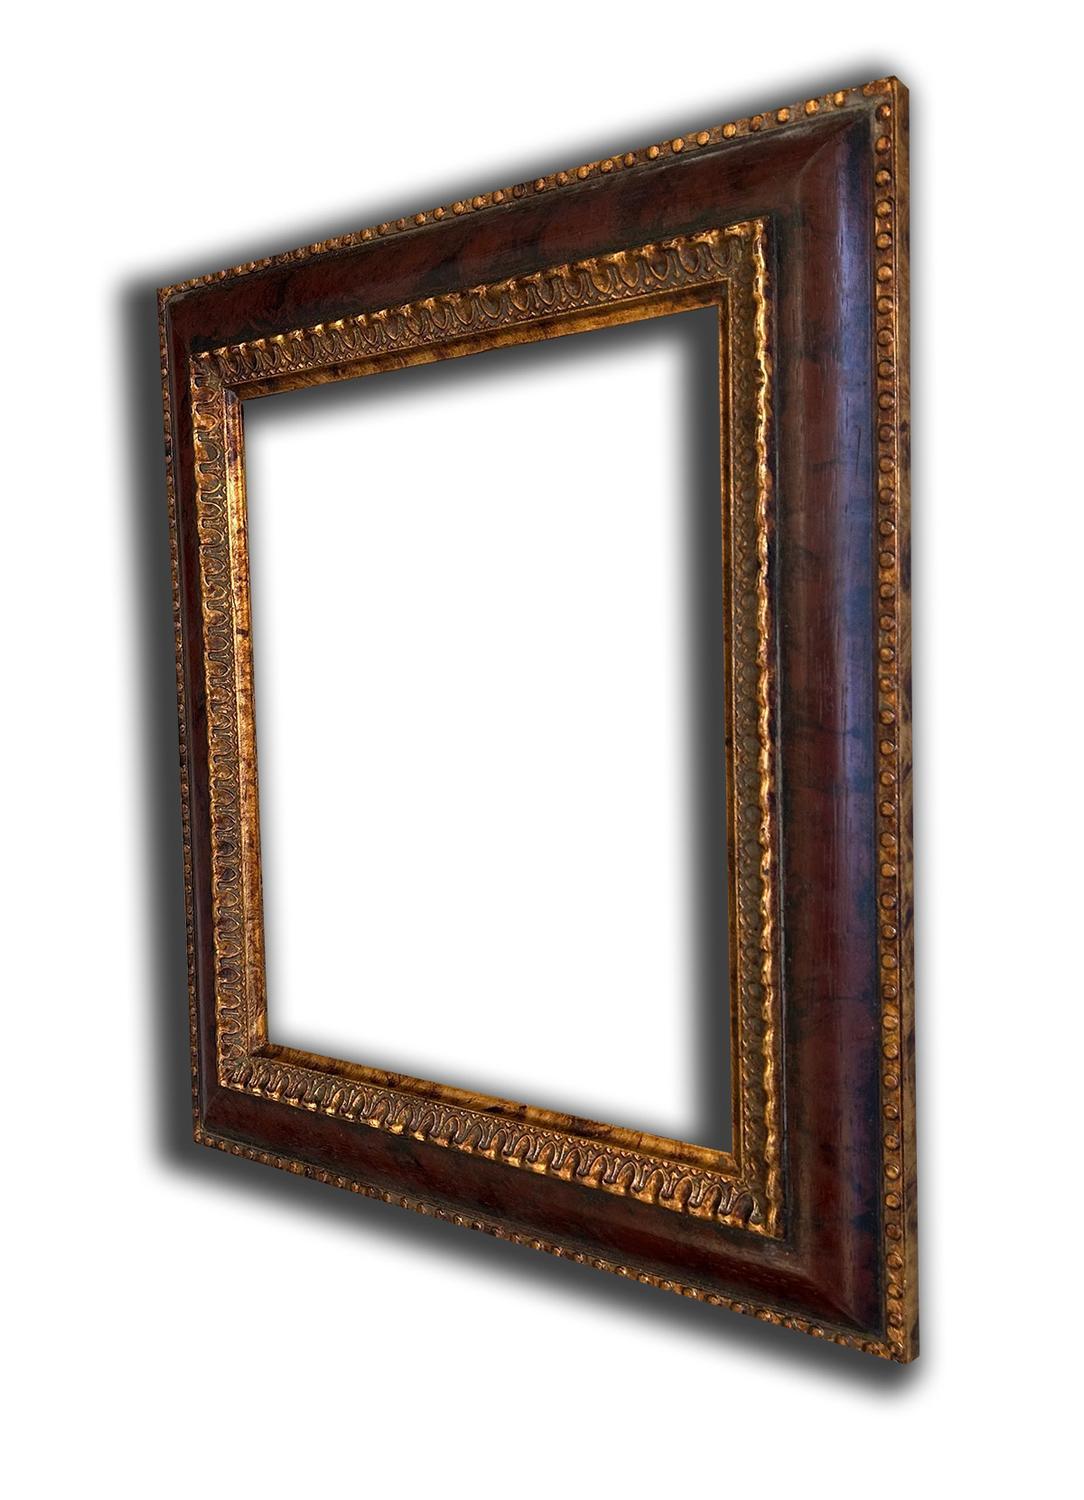 25x30 cm or 10x12 ins, wooden photo frame